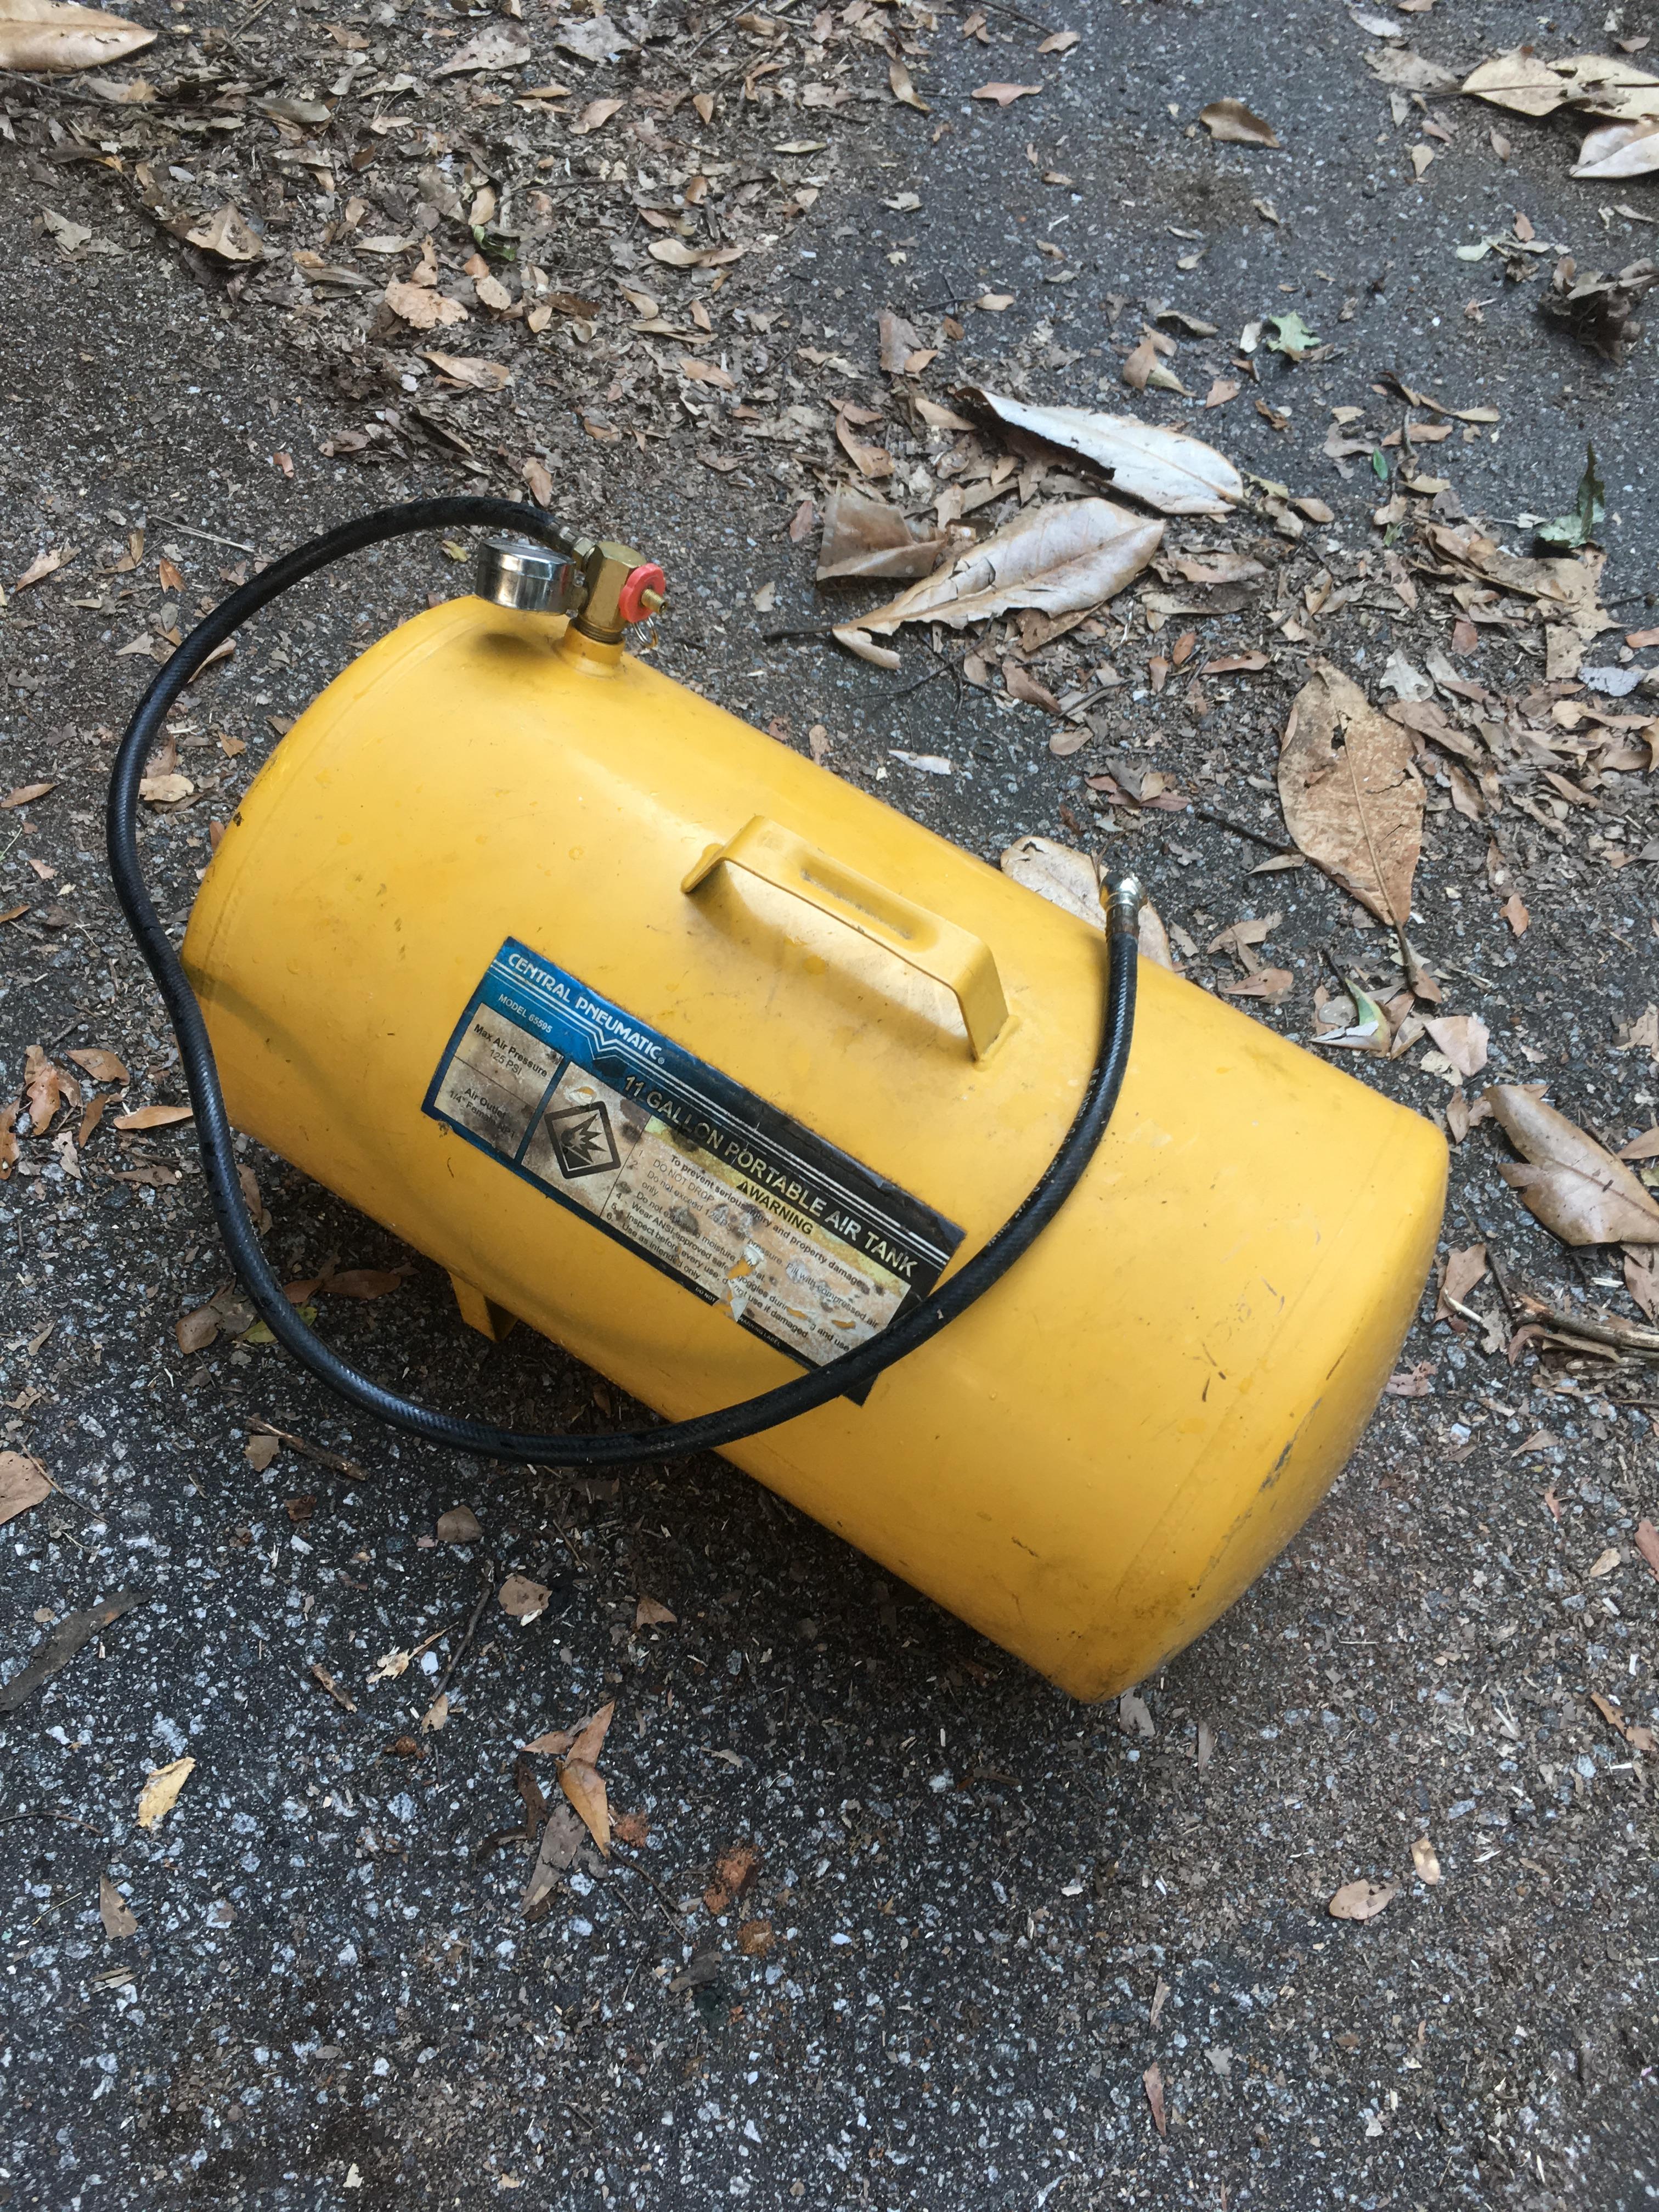 Central Pneumatics 11 Gallon Portable Air Tank (Local Pick Up Only)